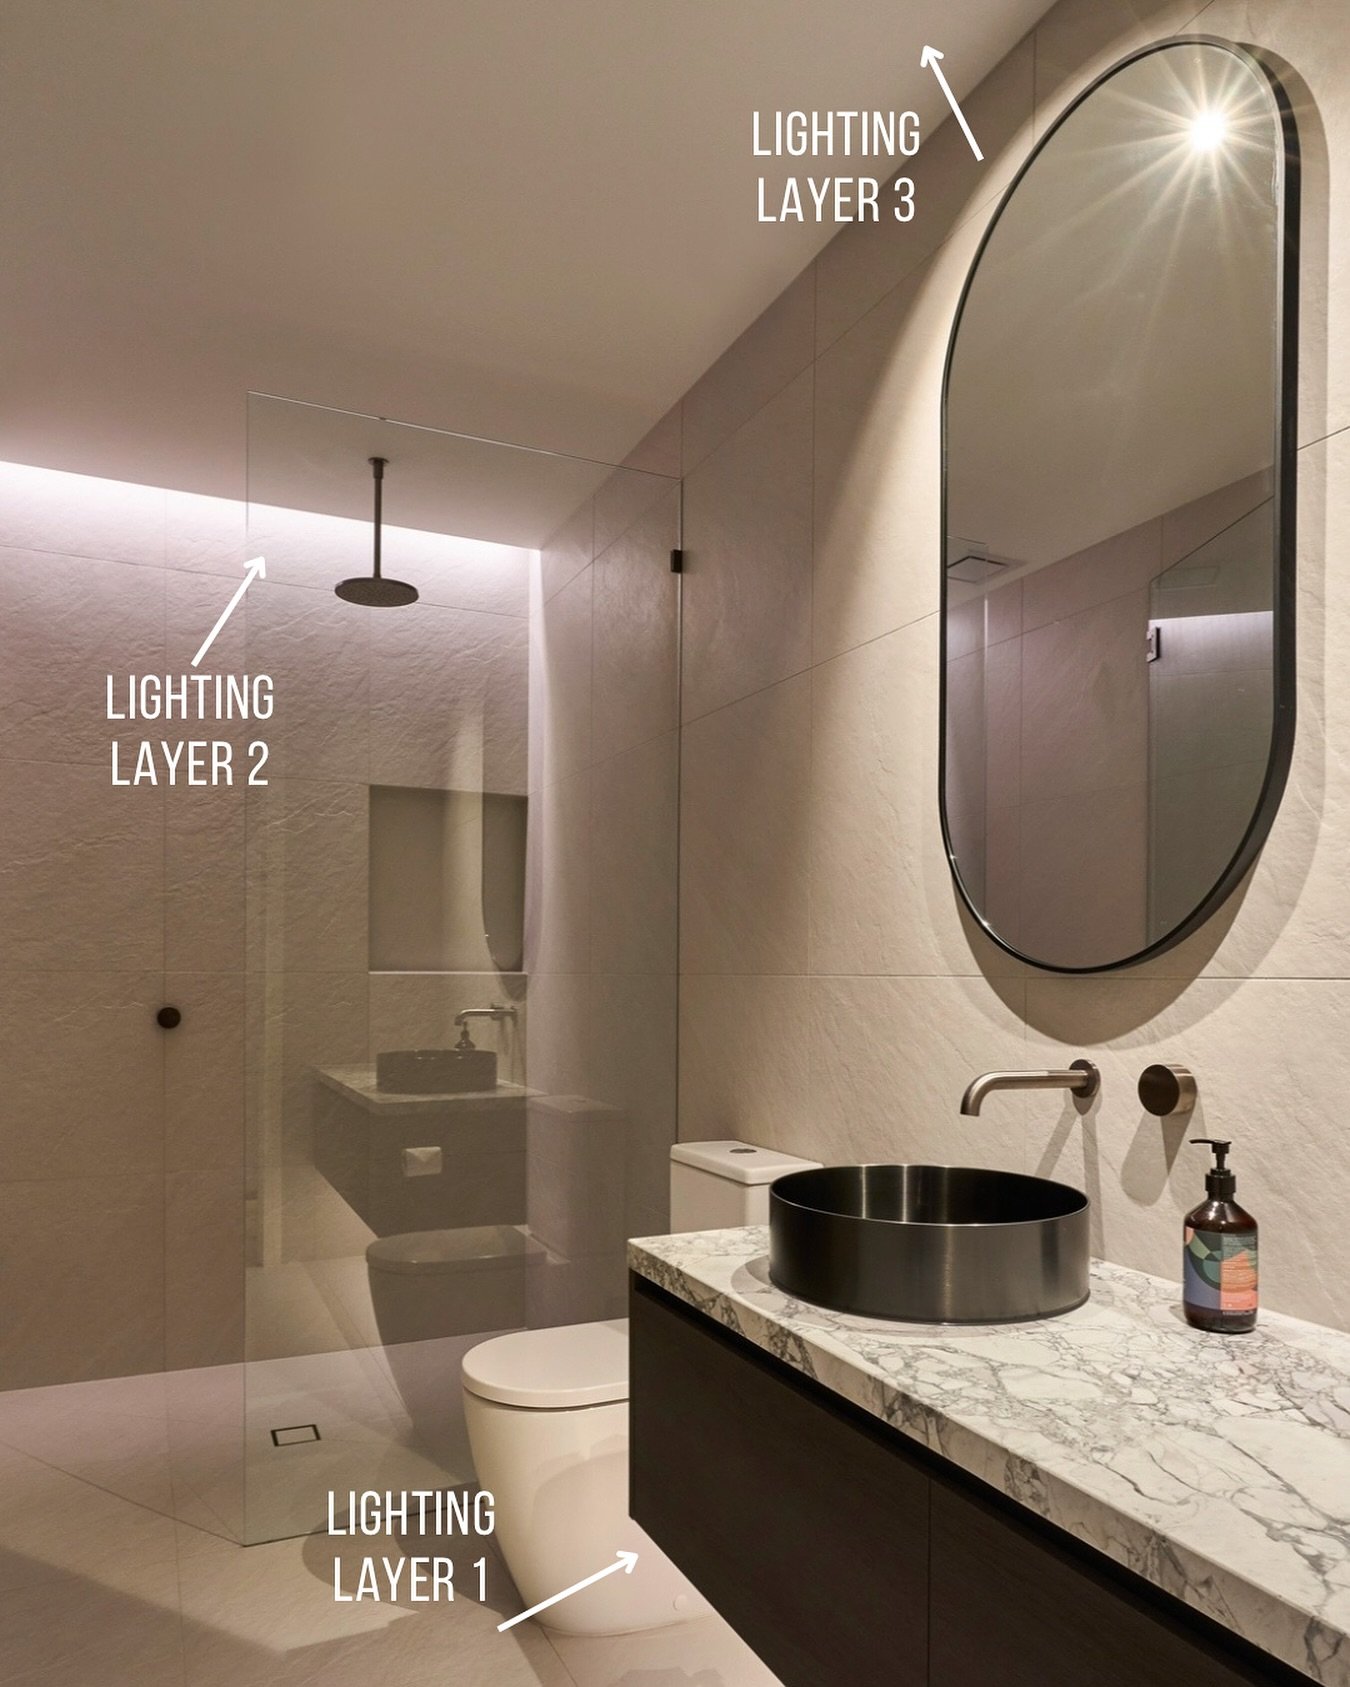 This specific lighting approach might not fit your bathroom setup, but by using varied layers of light (instead of just putting &lsquo;pancake&rsquo; downlights in the middle of the room) you&rsquo;ll be able to create a bathroom that transitions the